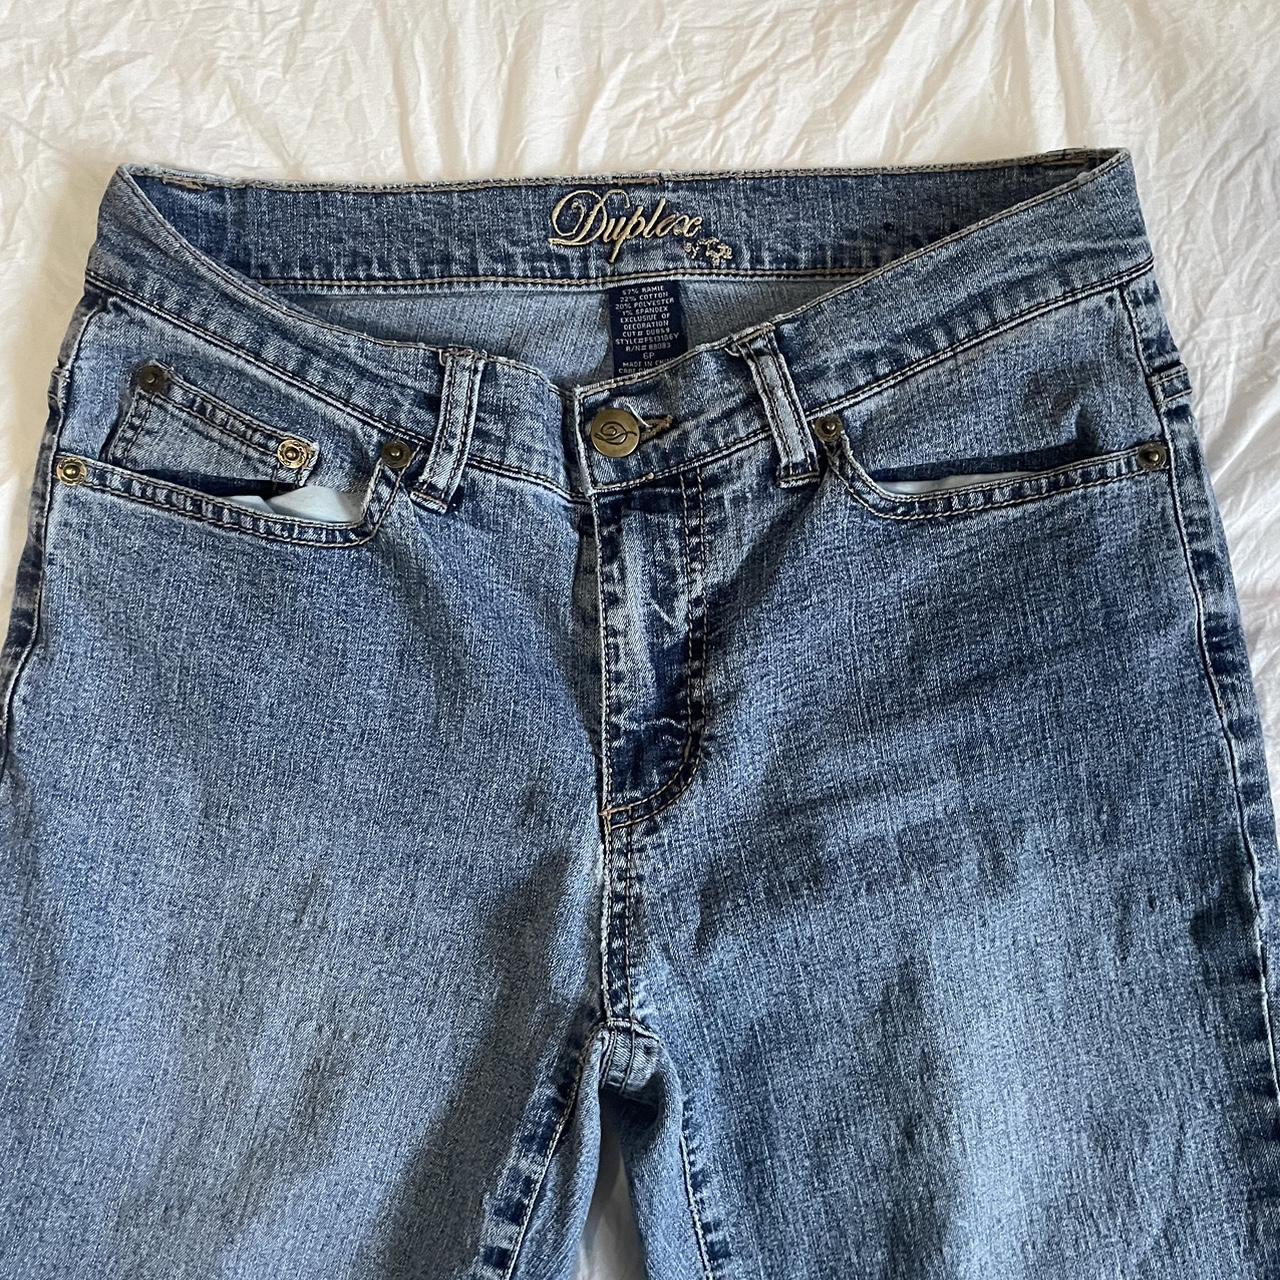 Y2k embroidered low rise jeans Size 6p brand is... - Depop